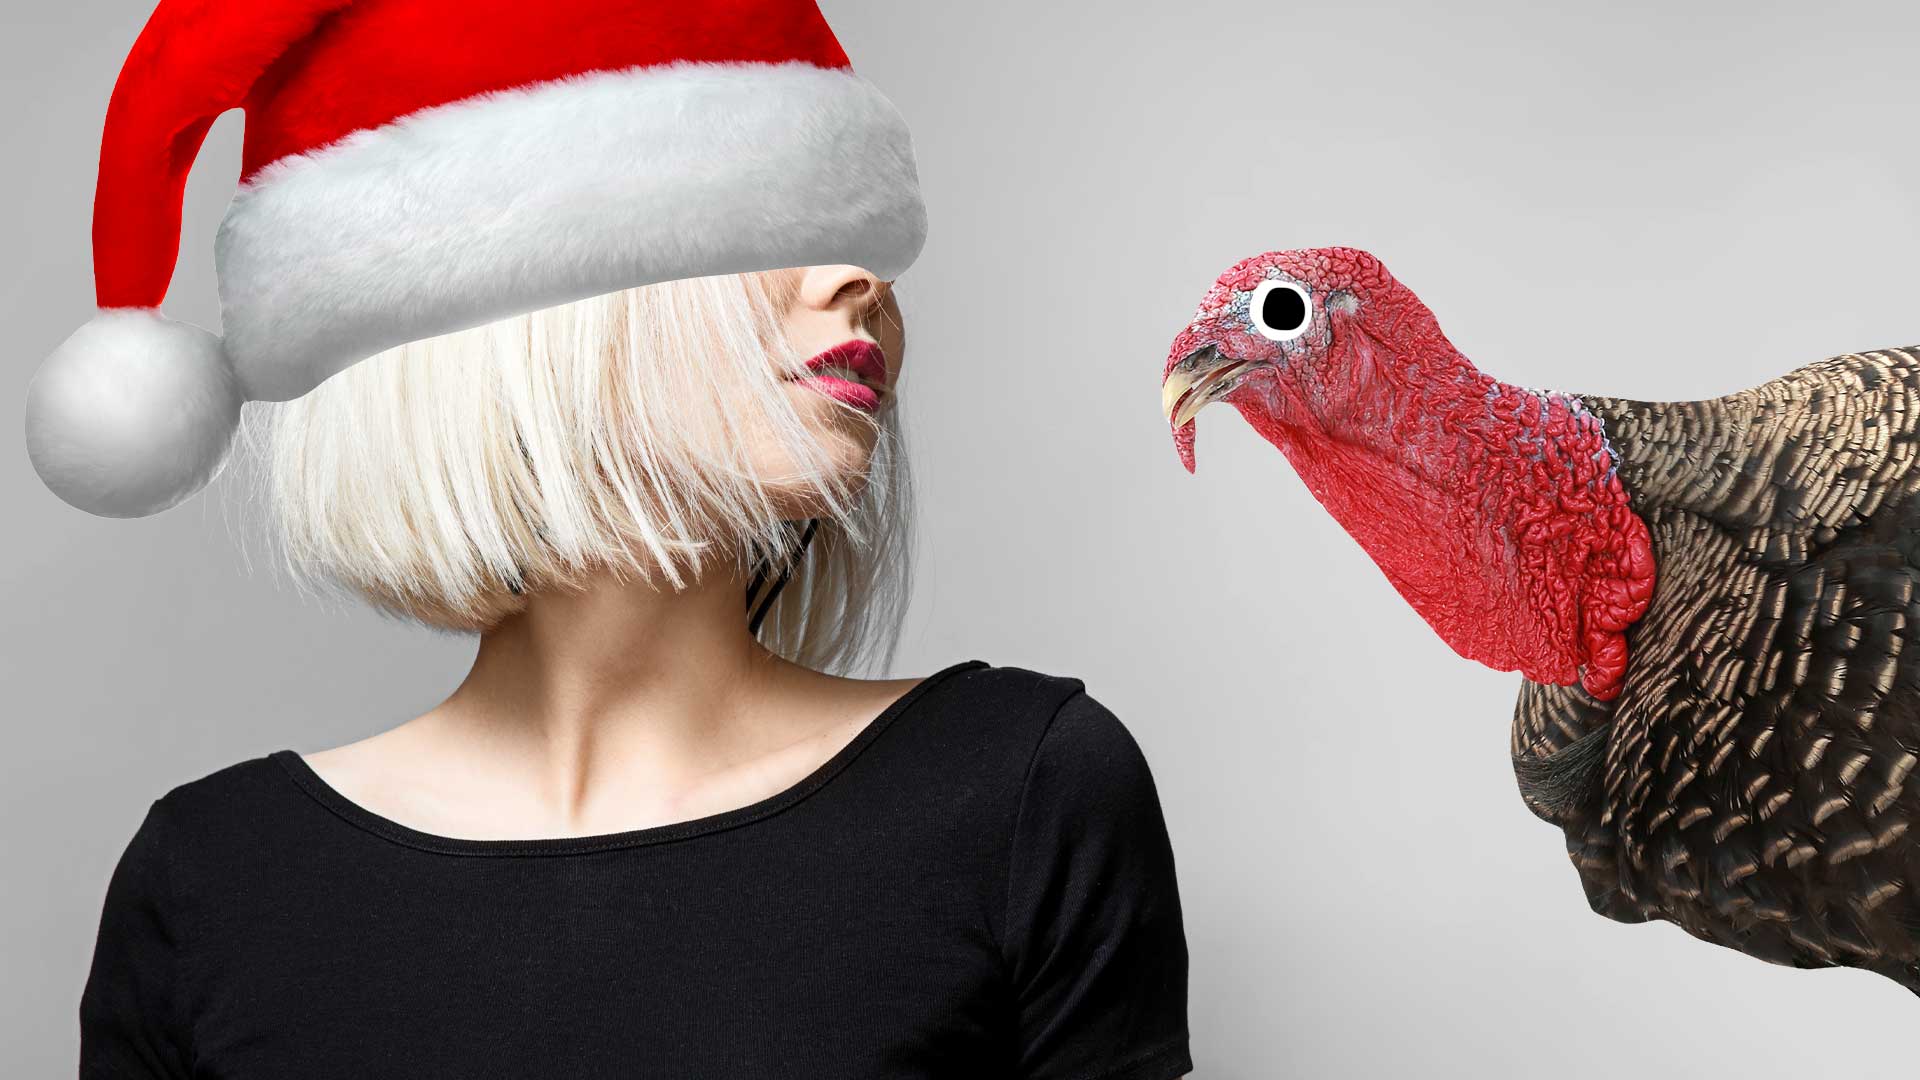 A woman in a Christmas hat being stared at by a turkey